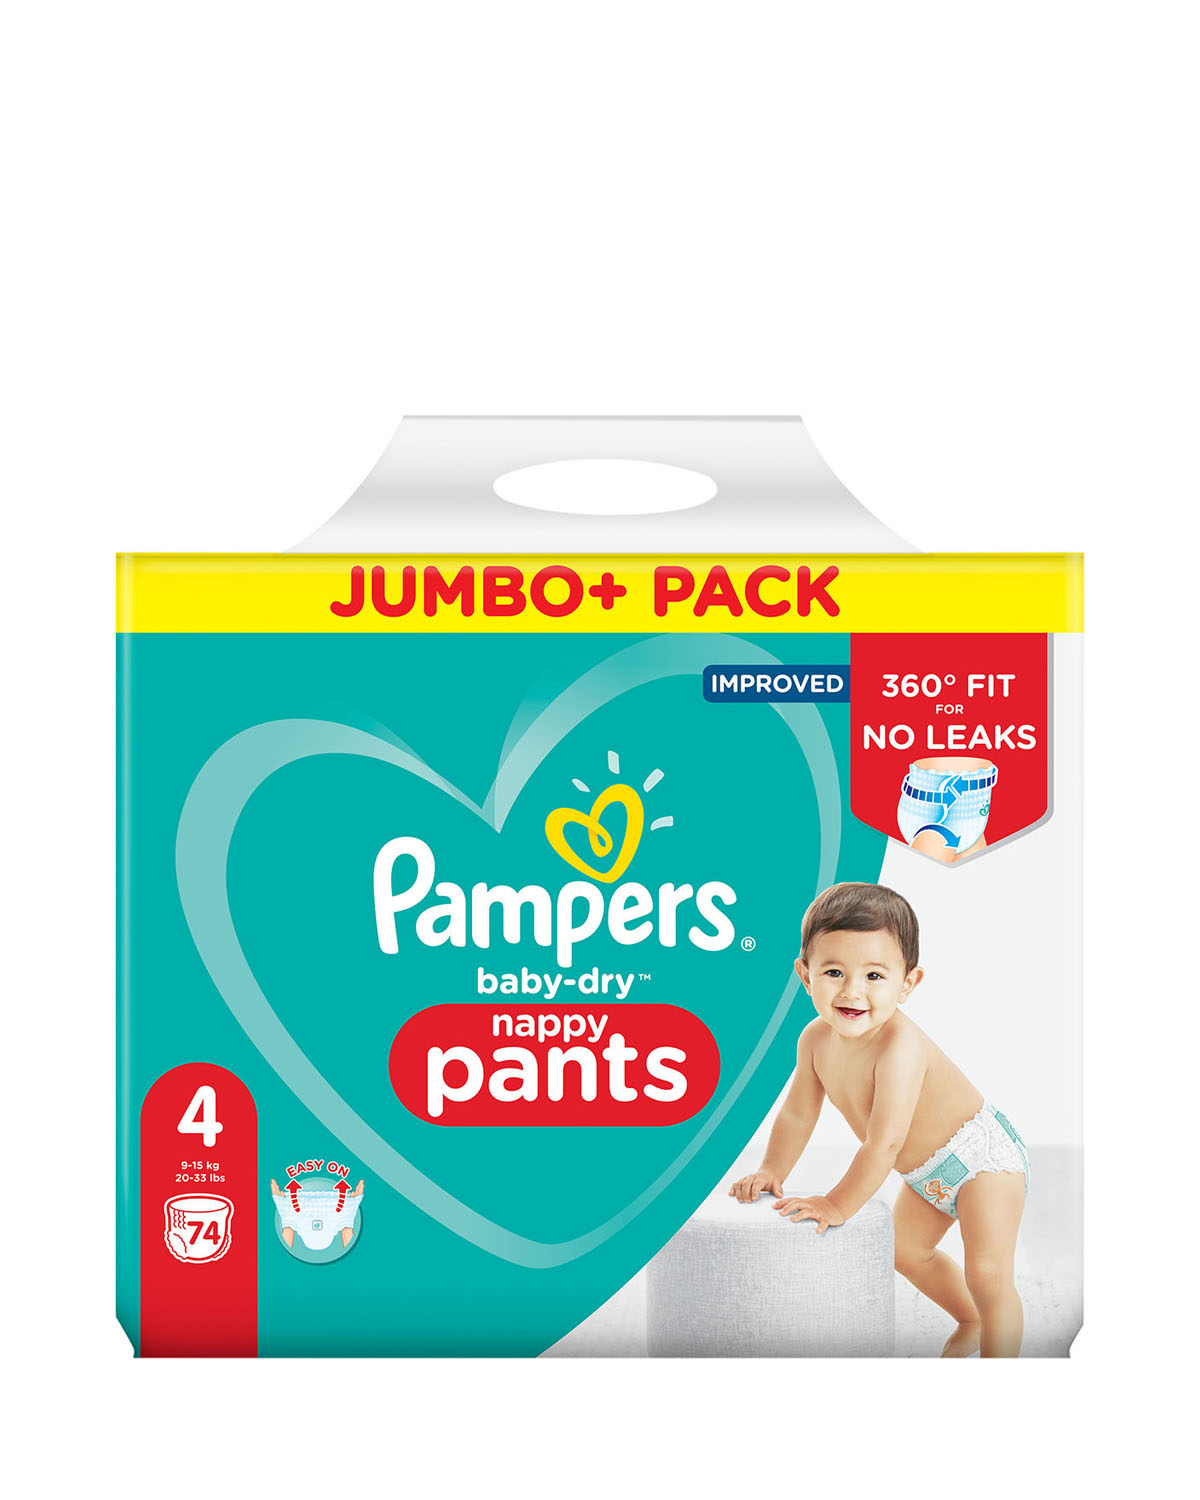 Pampers Baby Dry Nappy Pants Size: 4 - 74 Nappies